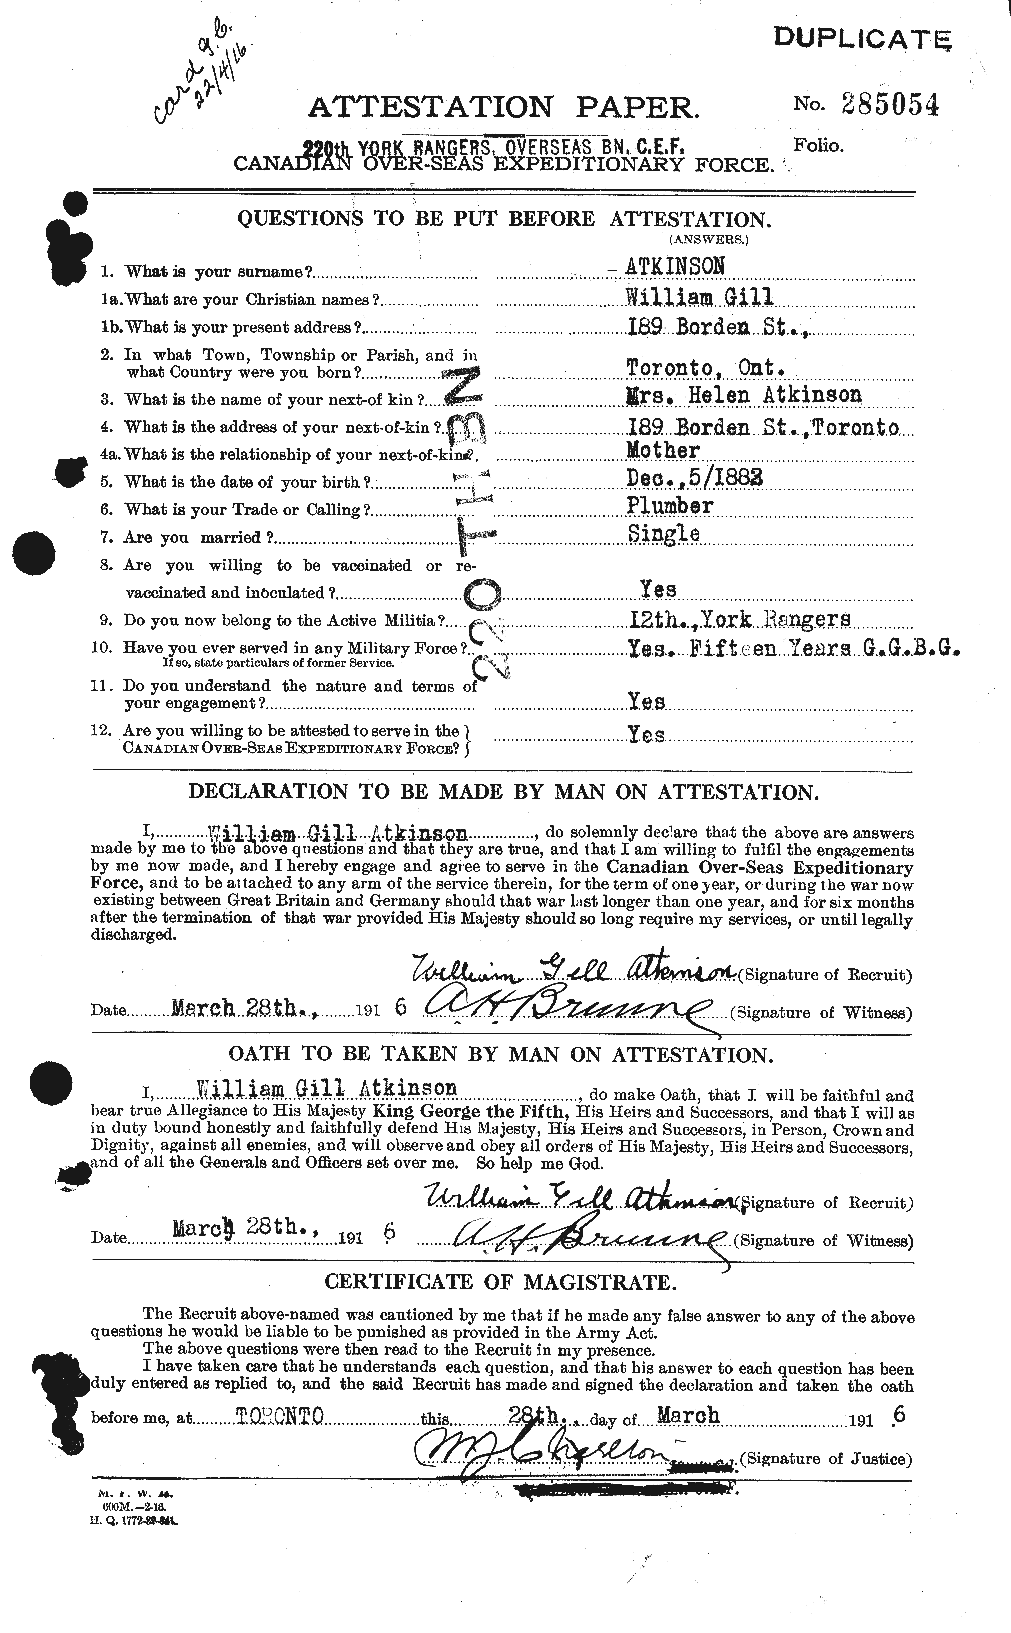 Personnel Records of the First World War - CEF 224186a